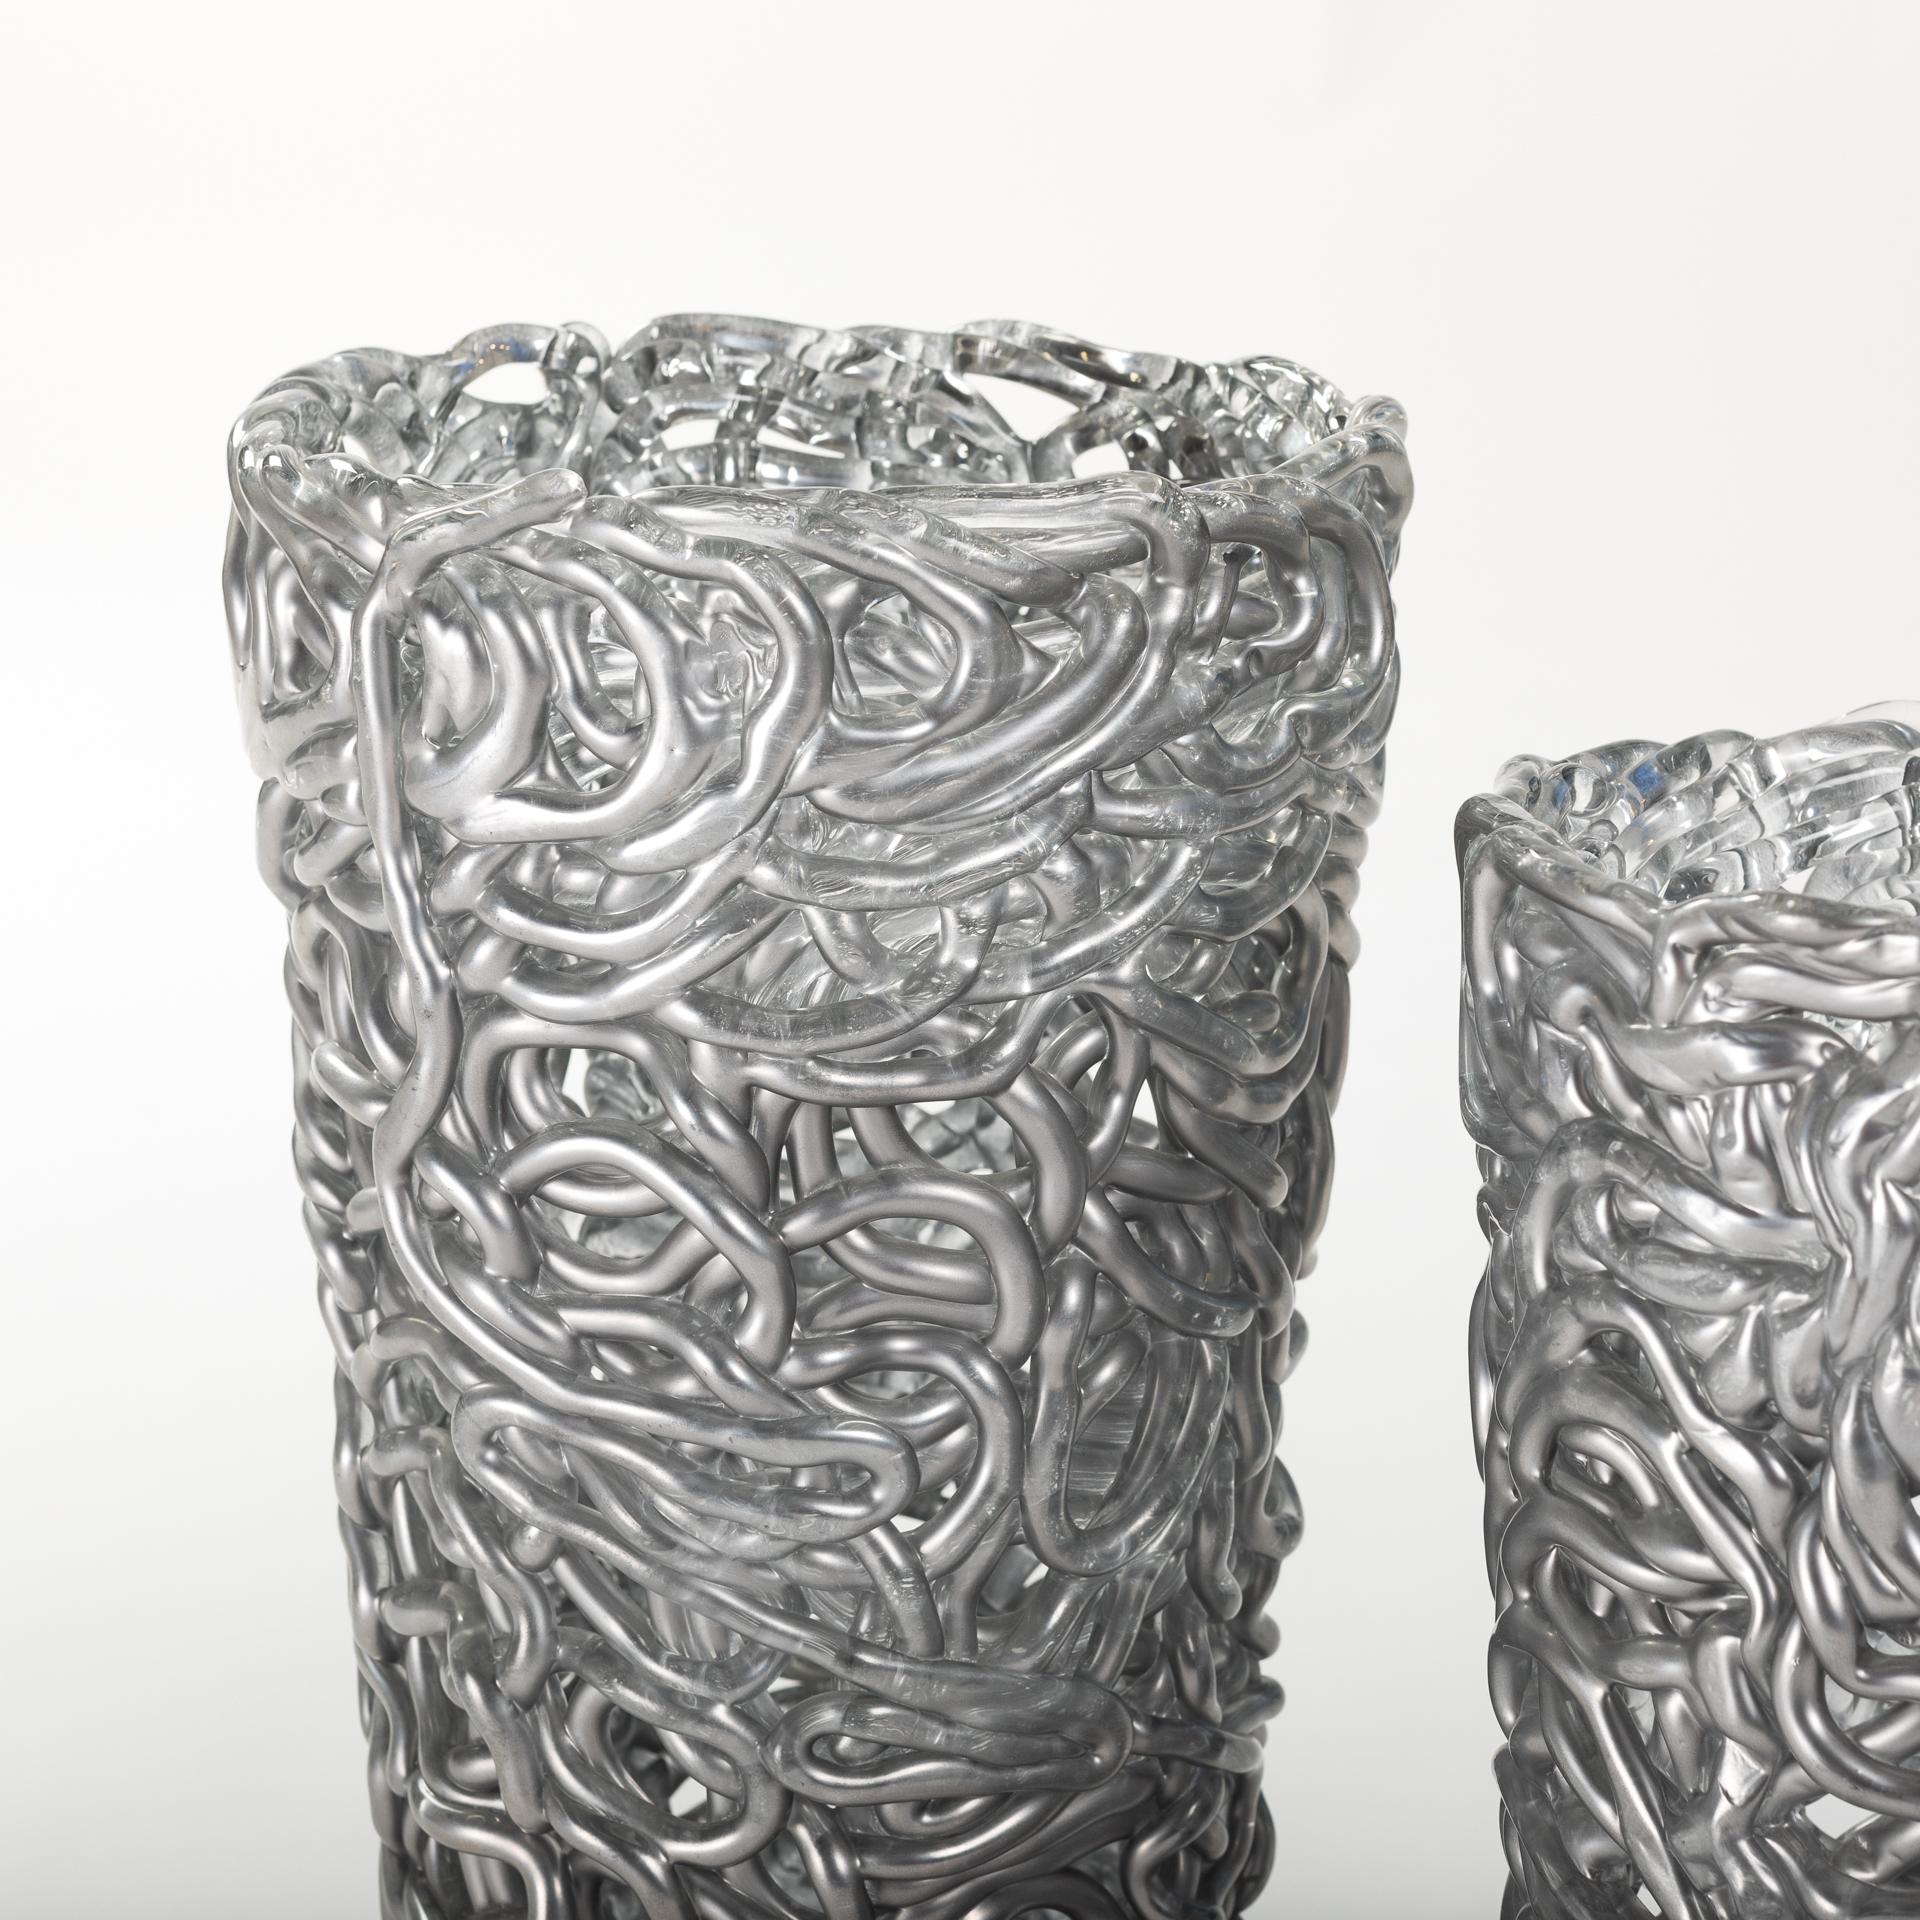 Hand-Crafted Pair of Midcentury Silver-Colored Murano Glass Vases out of Glass Veins For Sale